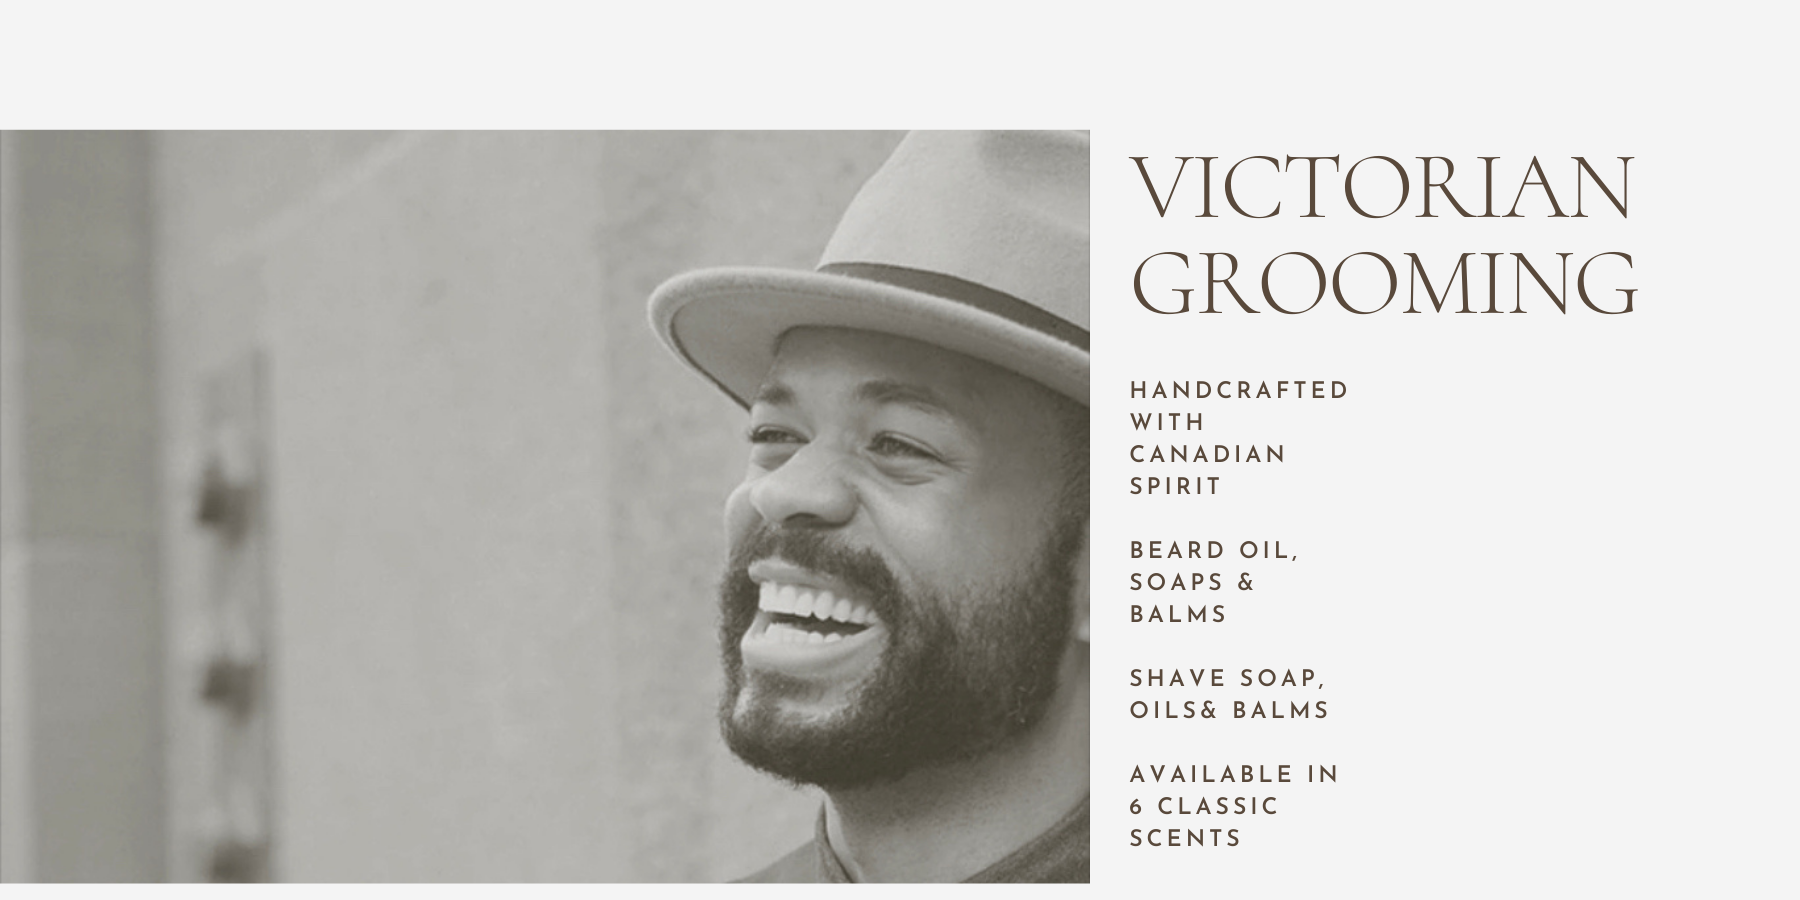 Victorian Grooming Co. features a proprietary blend of three all-natural base oils. Handcrafted with Canadian spirit and the desire to find an all-natural solution to keeping your beard looking, feeling, and smelling amazing. 